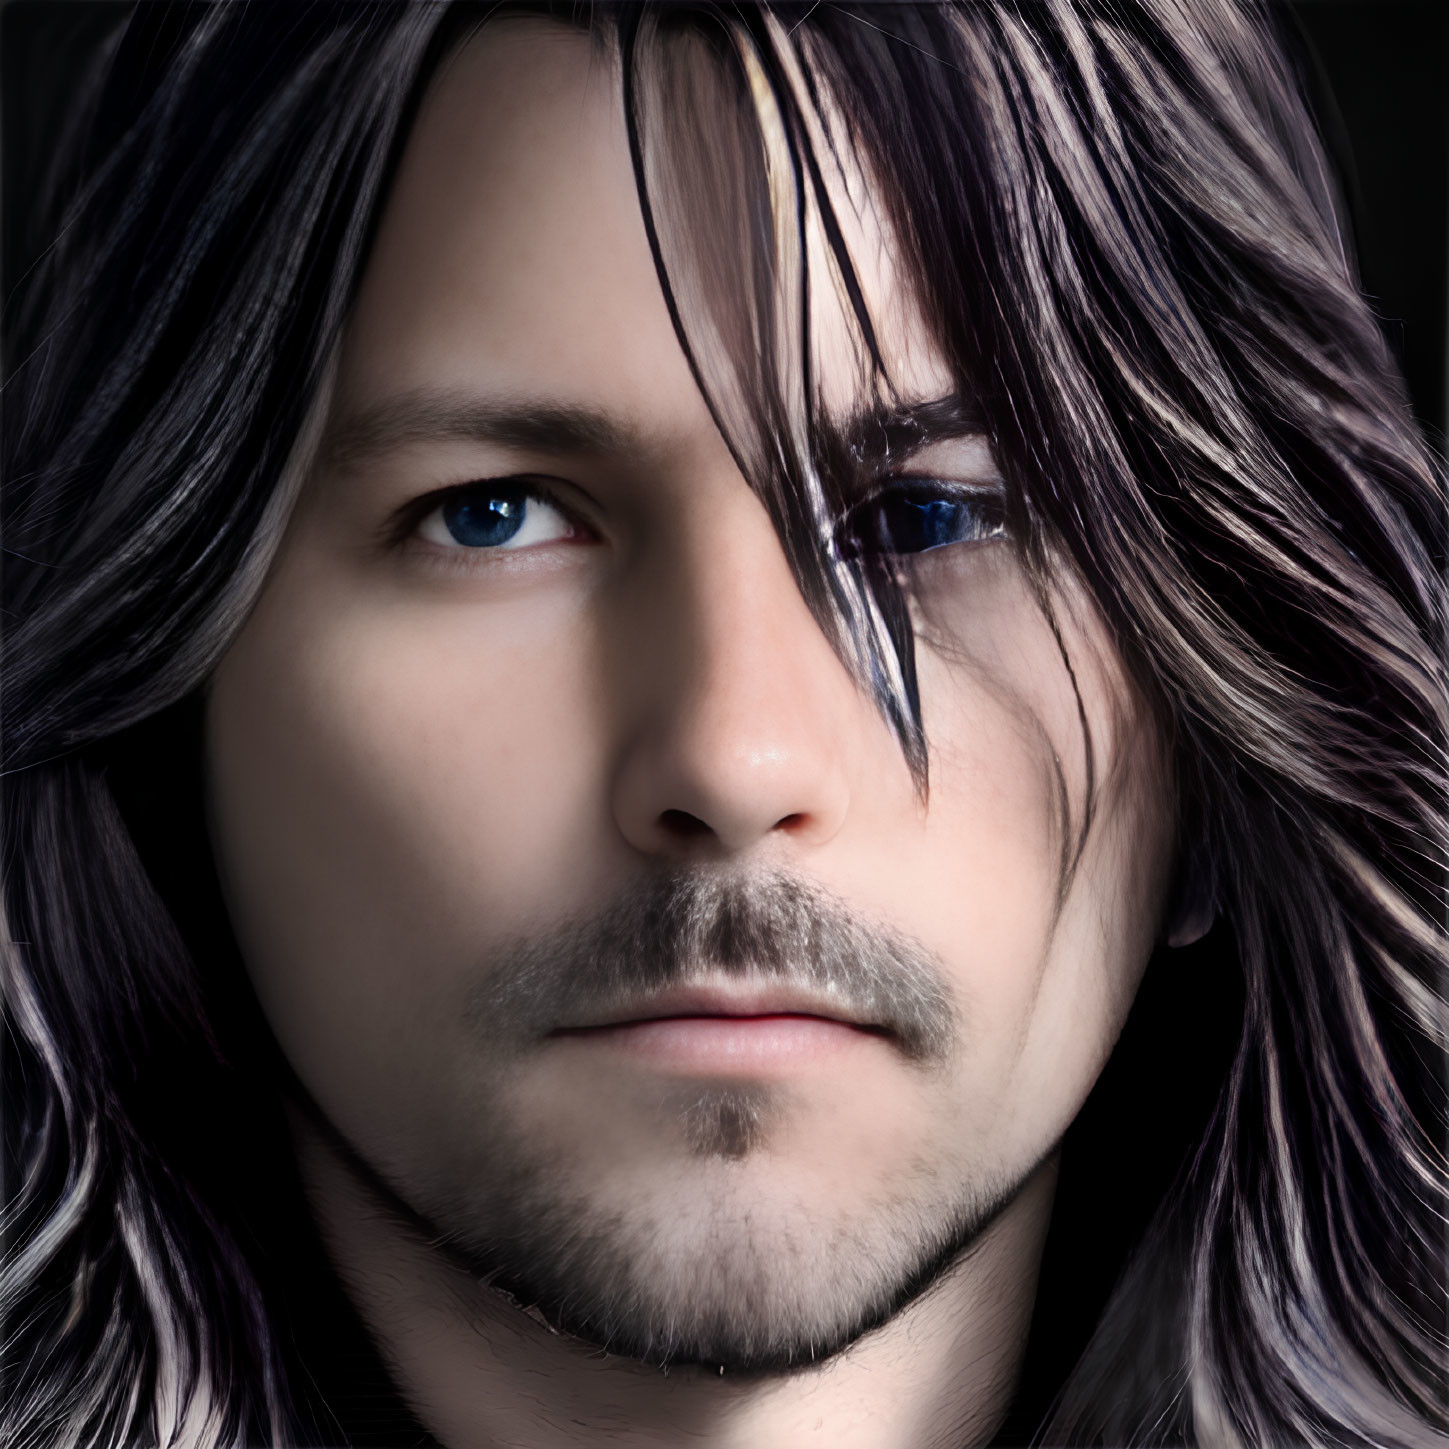 Person with Striking Blue Eyes and Long Dark Hair Close-Up